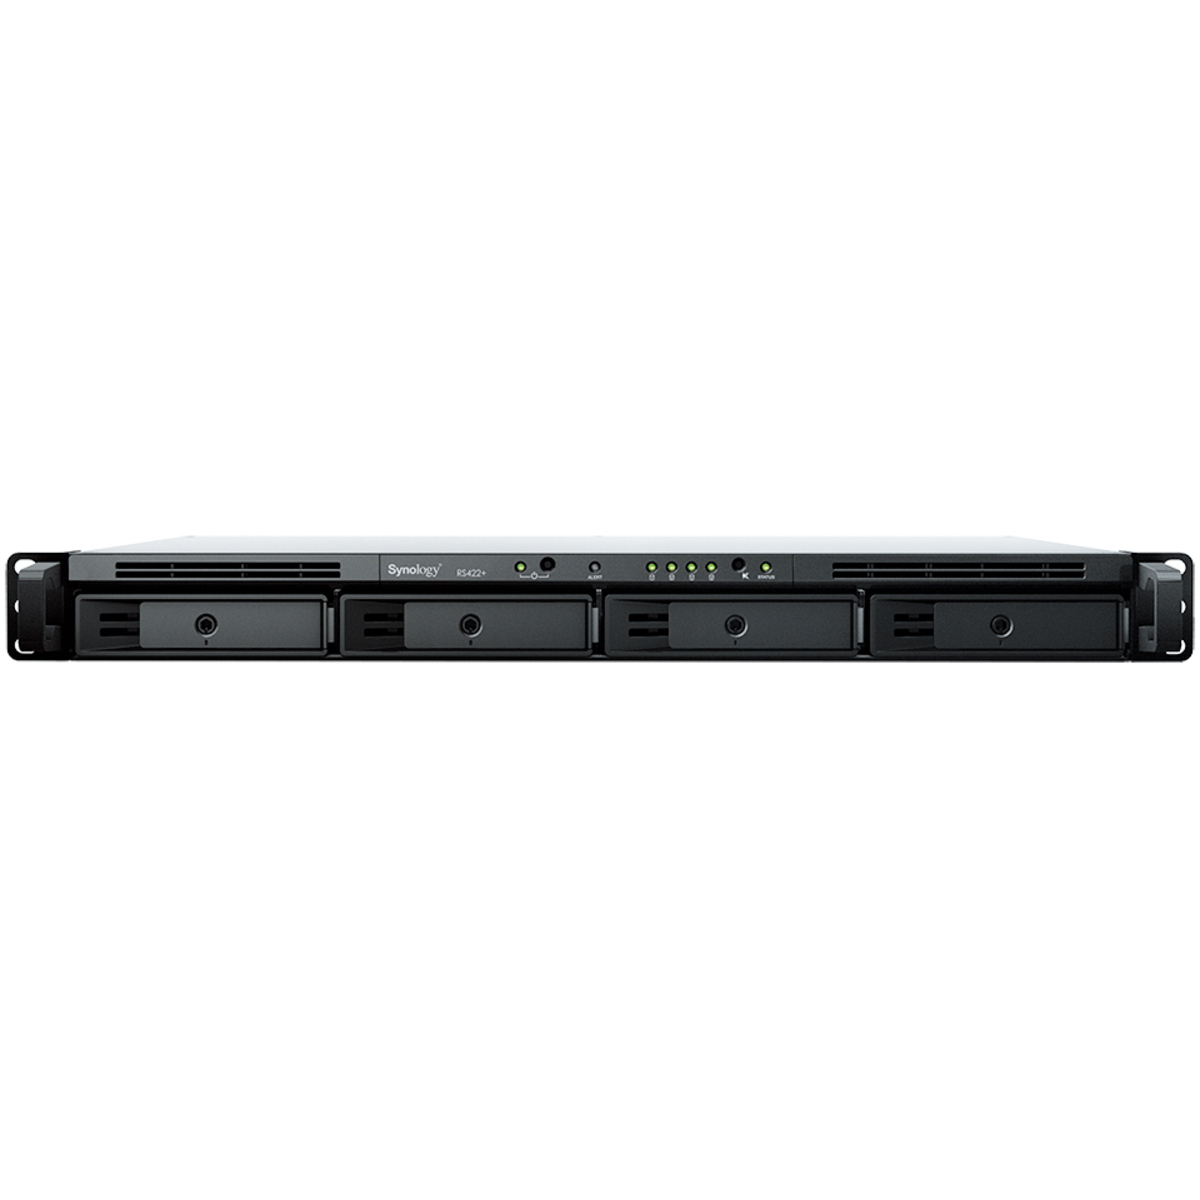 Synology RackStation RS422+ 32tb 4-Bay RackMount Personal / Basic Home / Small Office NAS - Network Attached Storage Device 4x8tb Western Digital Red Plus WD80EFPX 3.5 7200rpm SATA 6Gb/s HDD NAS Class Drives Installed - Burn-In Tested RackStation RS422+